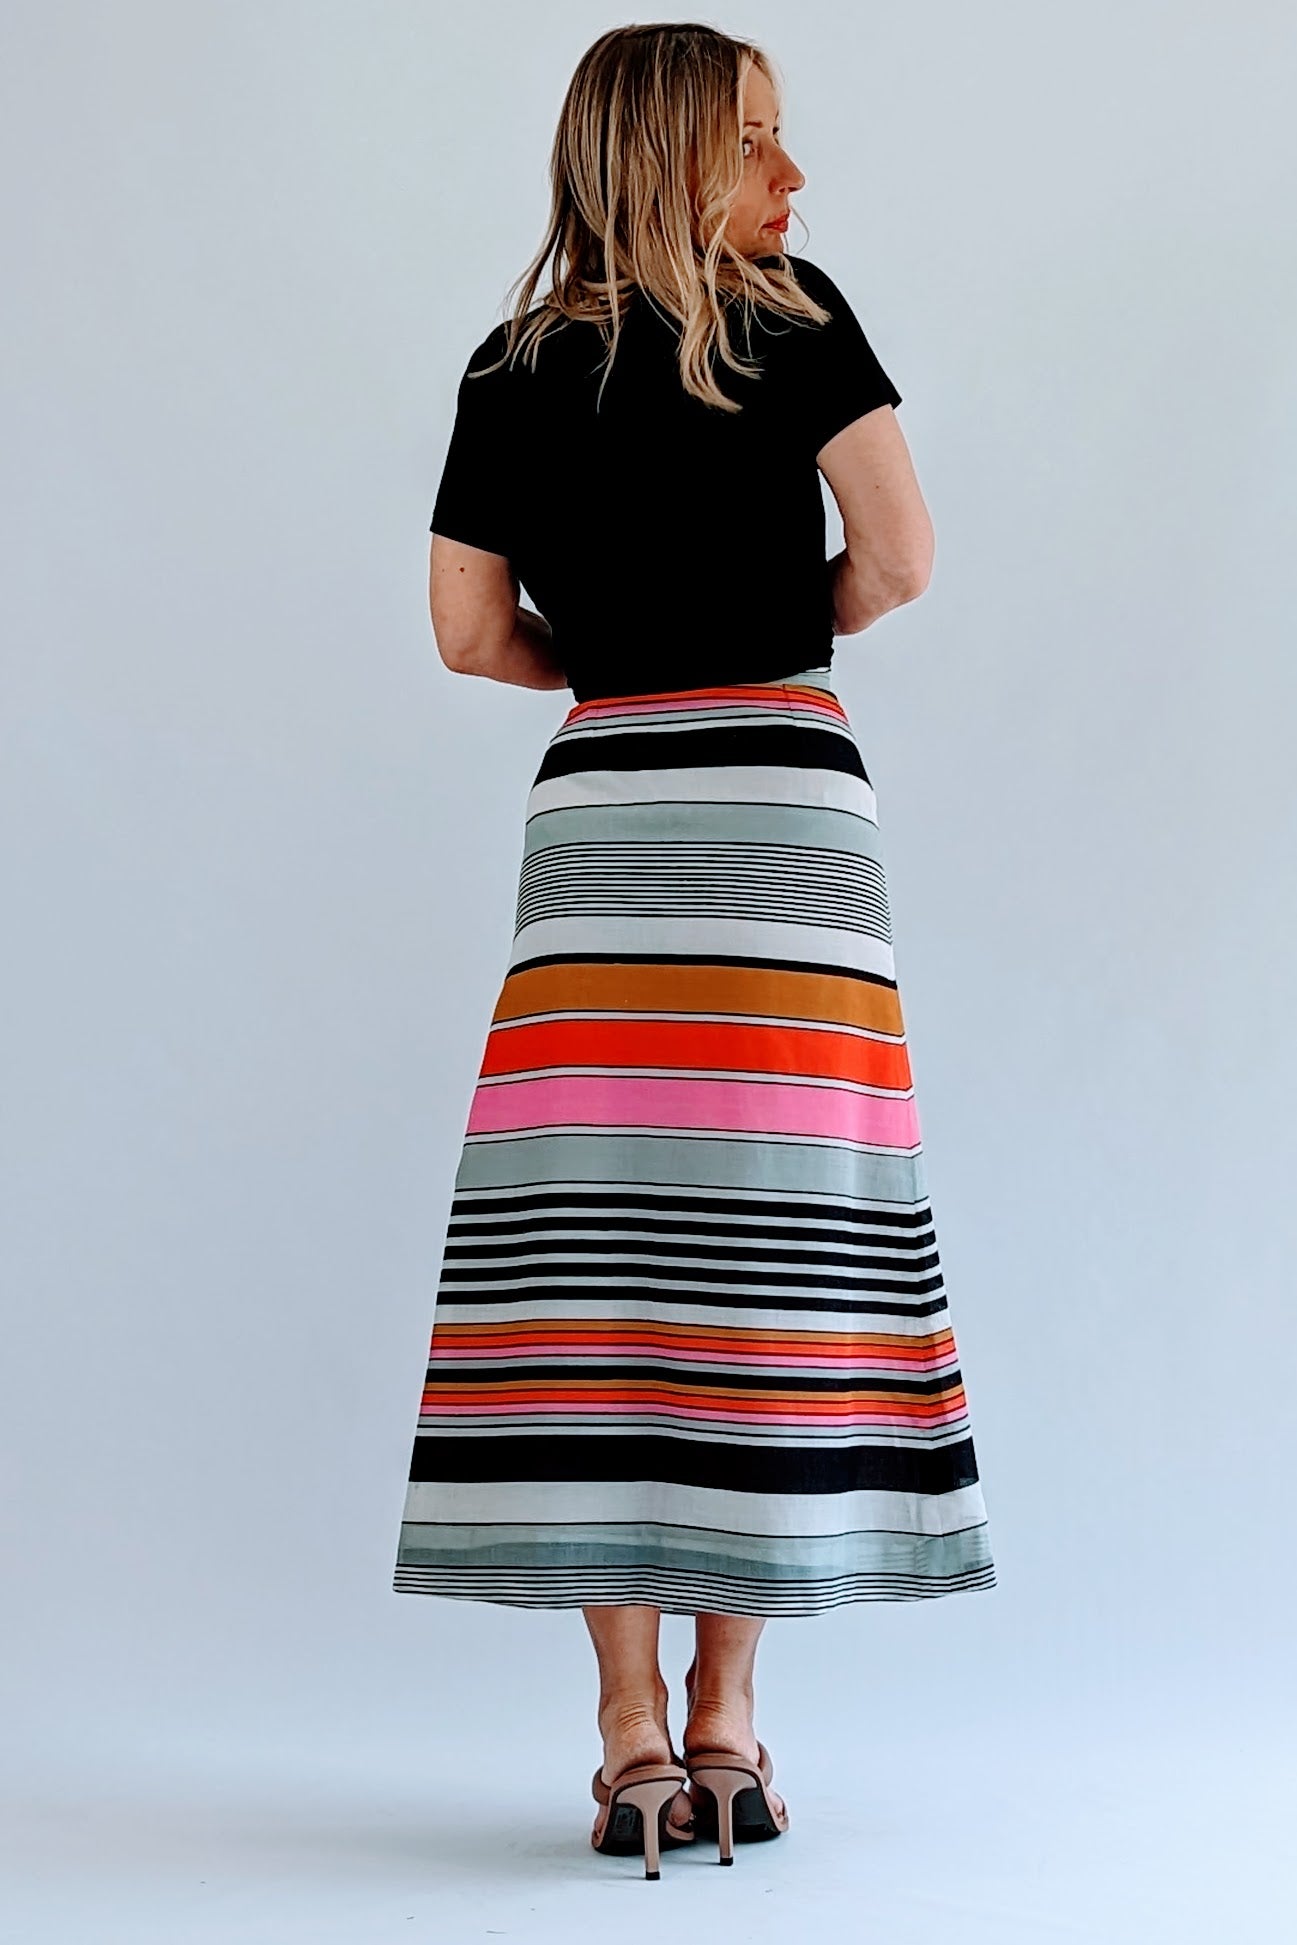 Vintage skirt with stripes